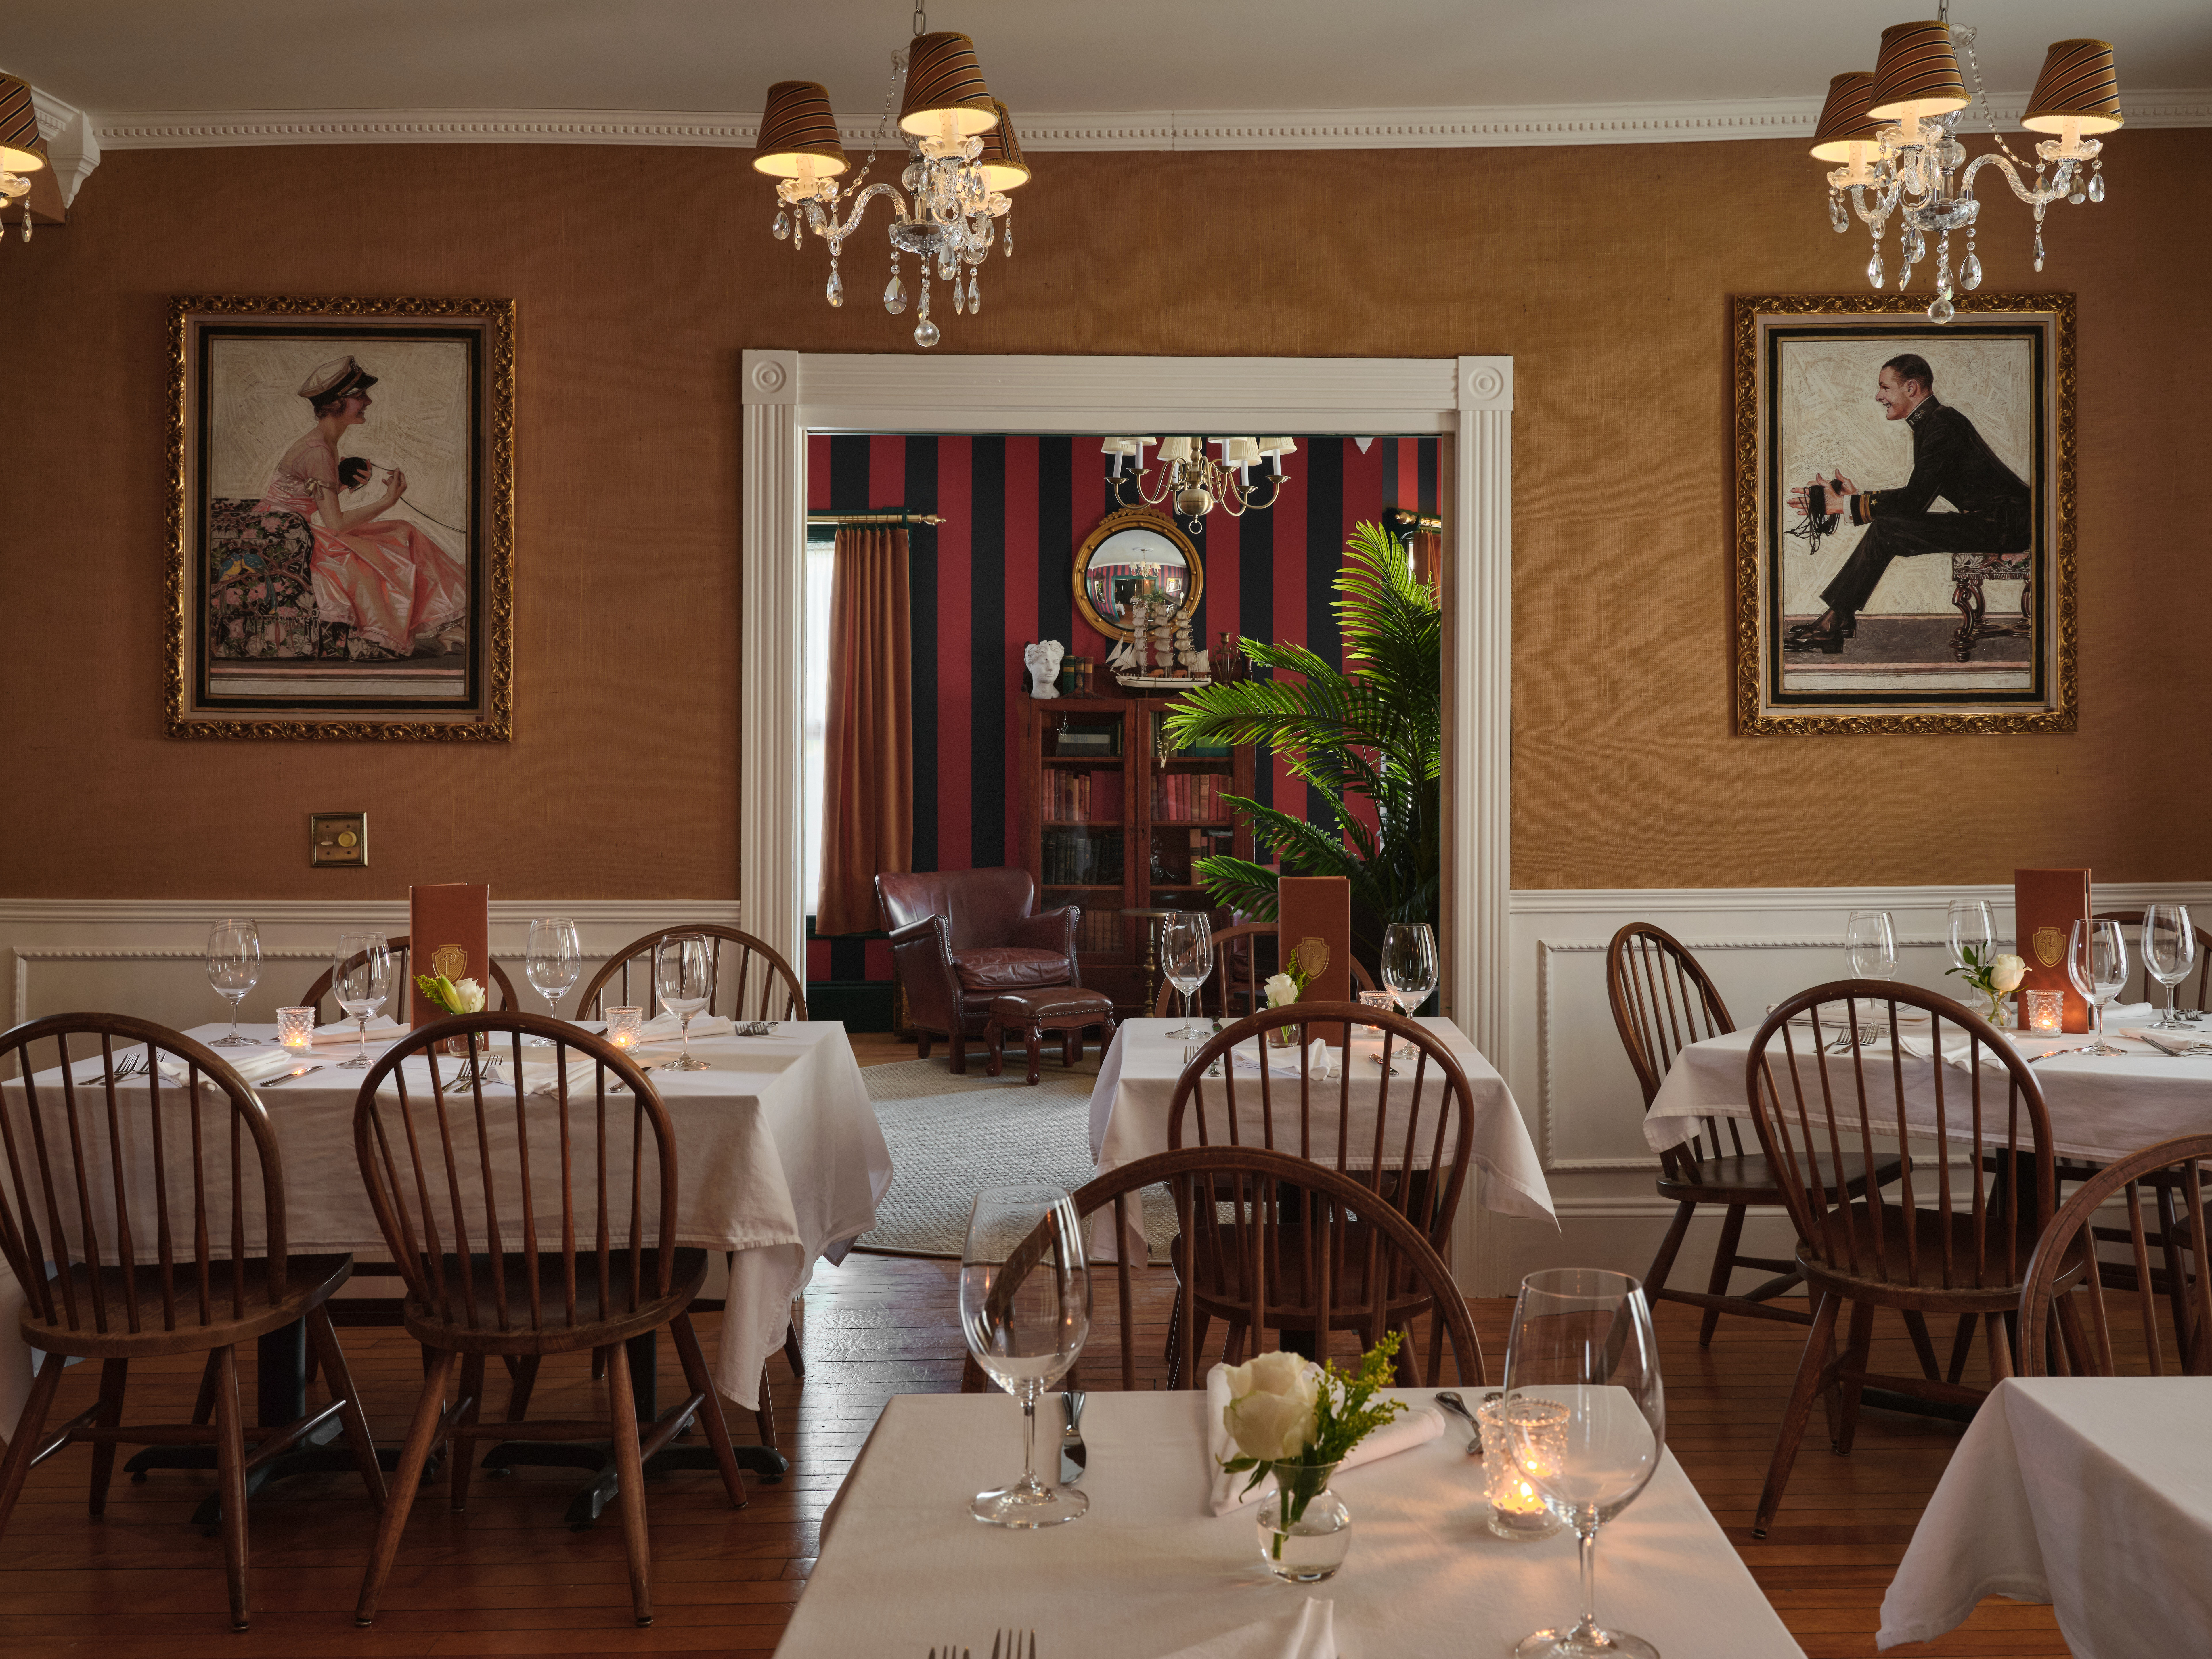 The interior of our midcoast restaurant